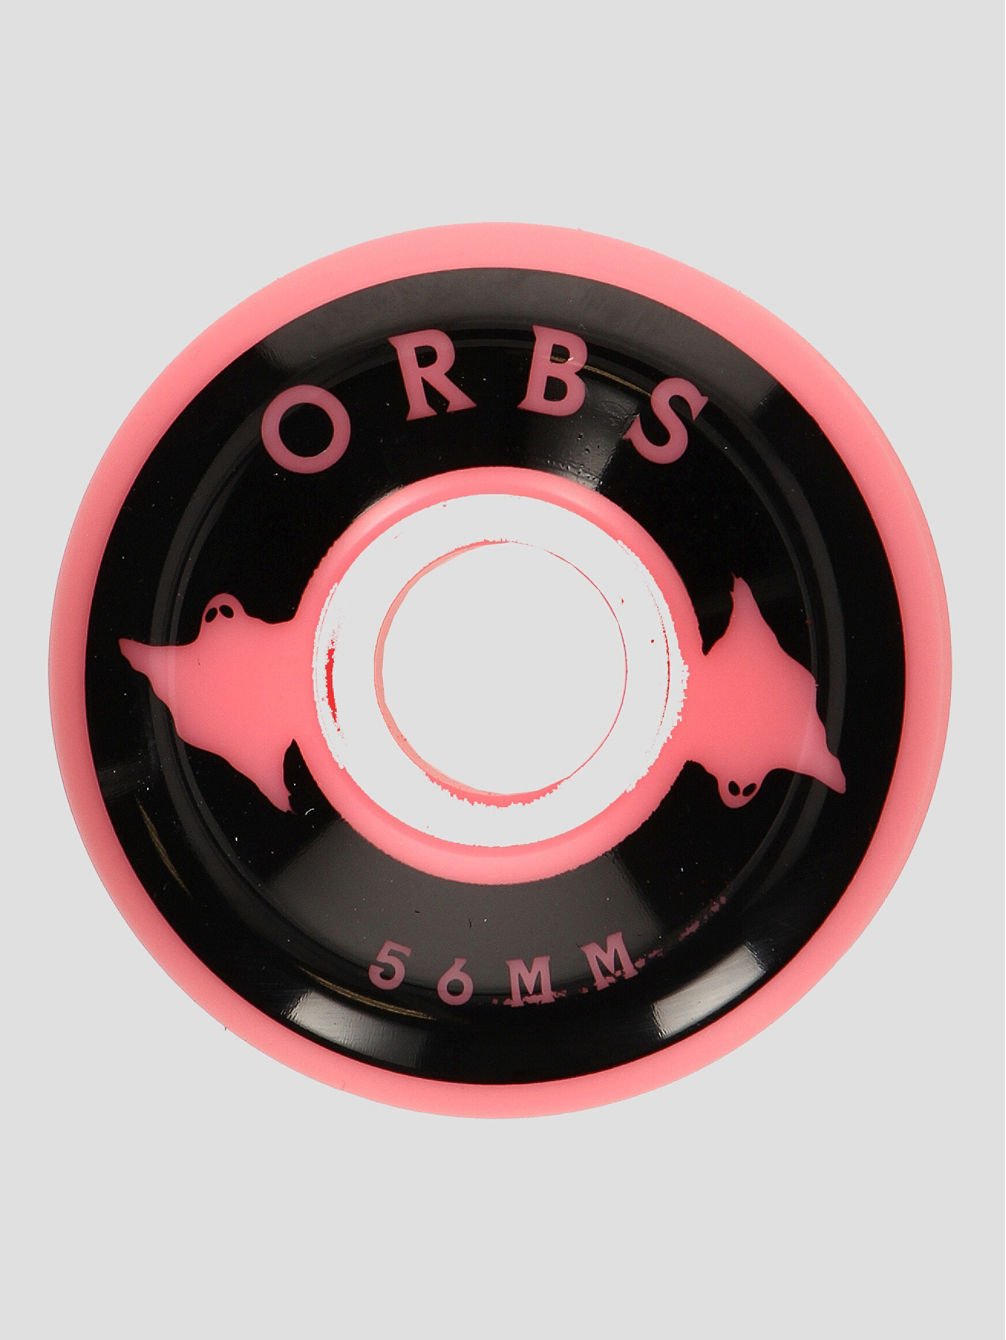 Orbs Specters - Conical - 99A 56mm Wheels